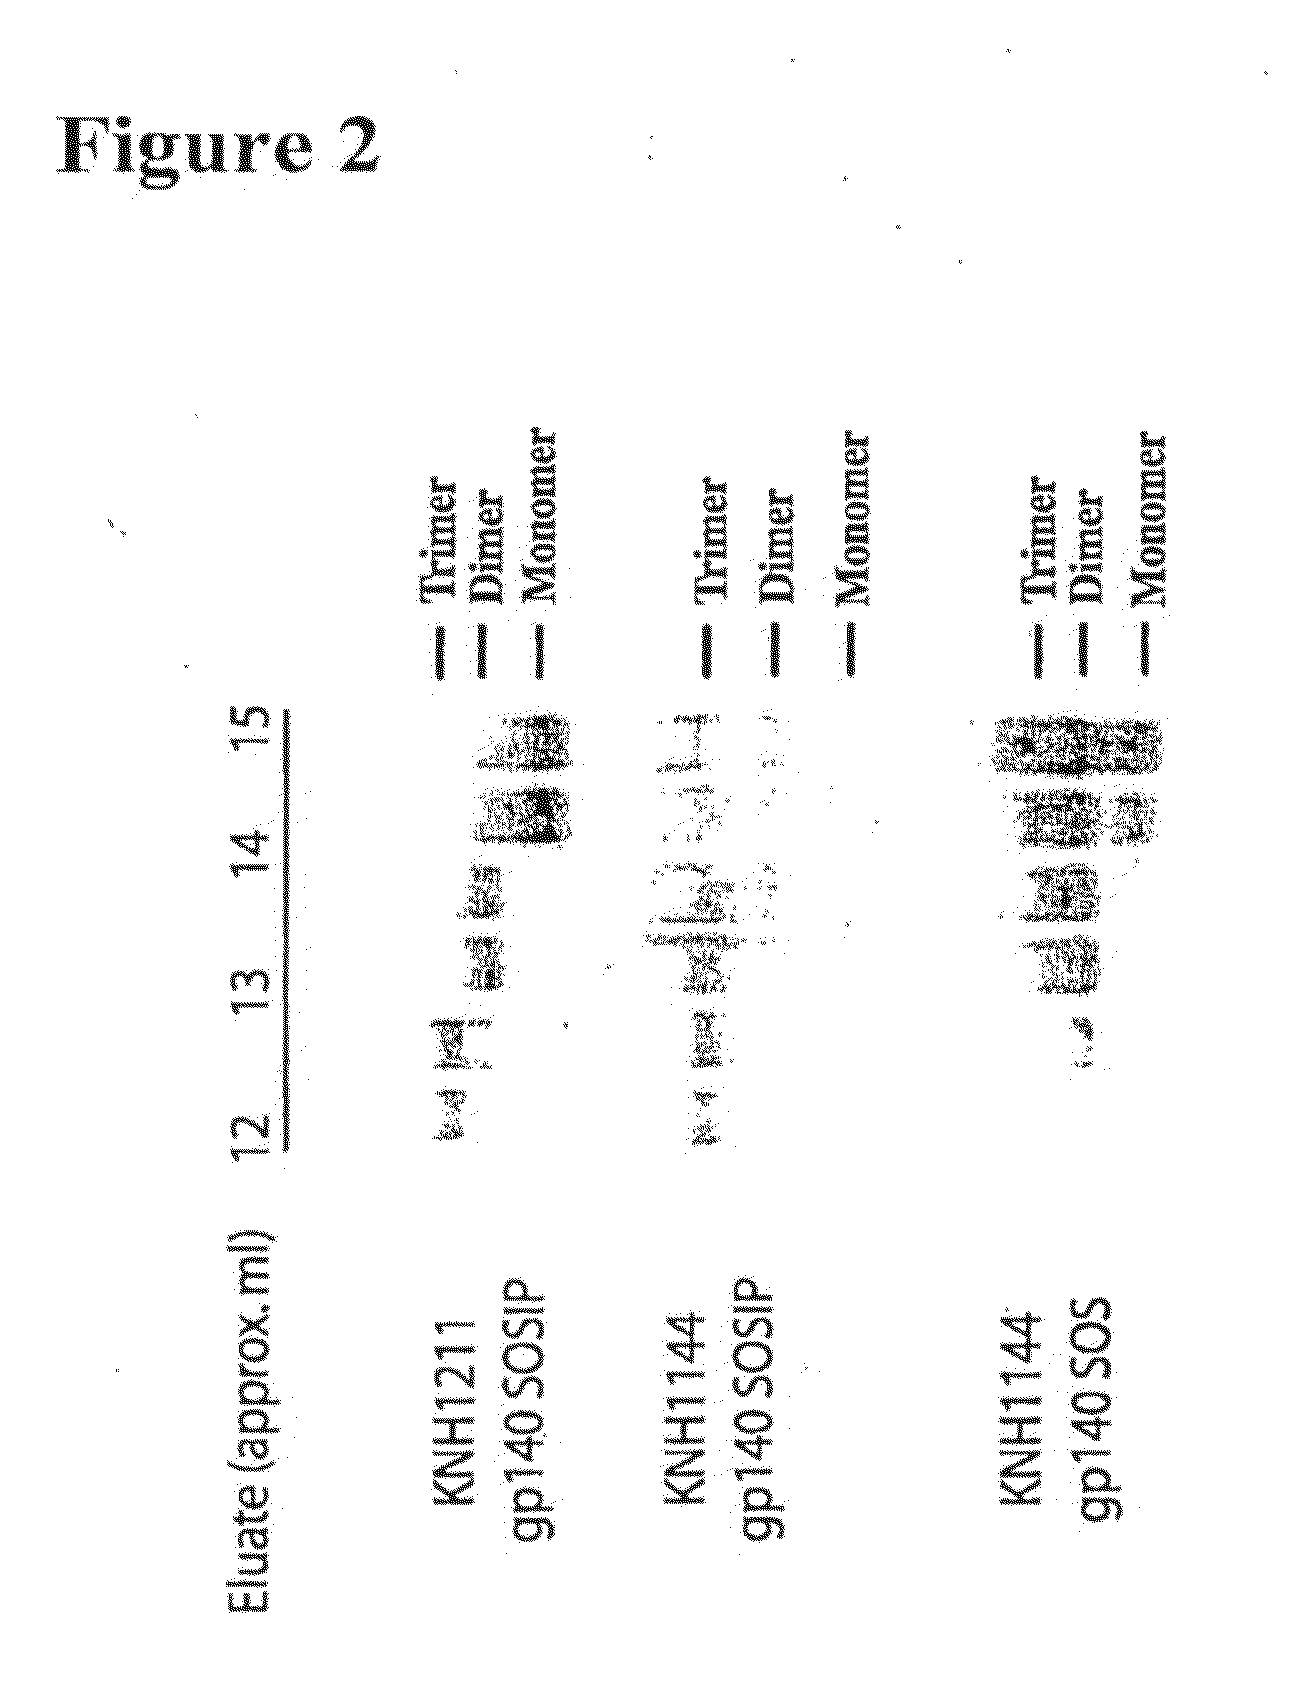 Soluble stabilized trimeric hiv env proteins and uses thereof